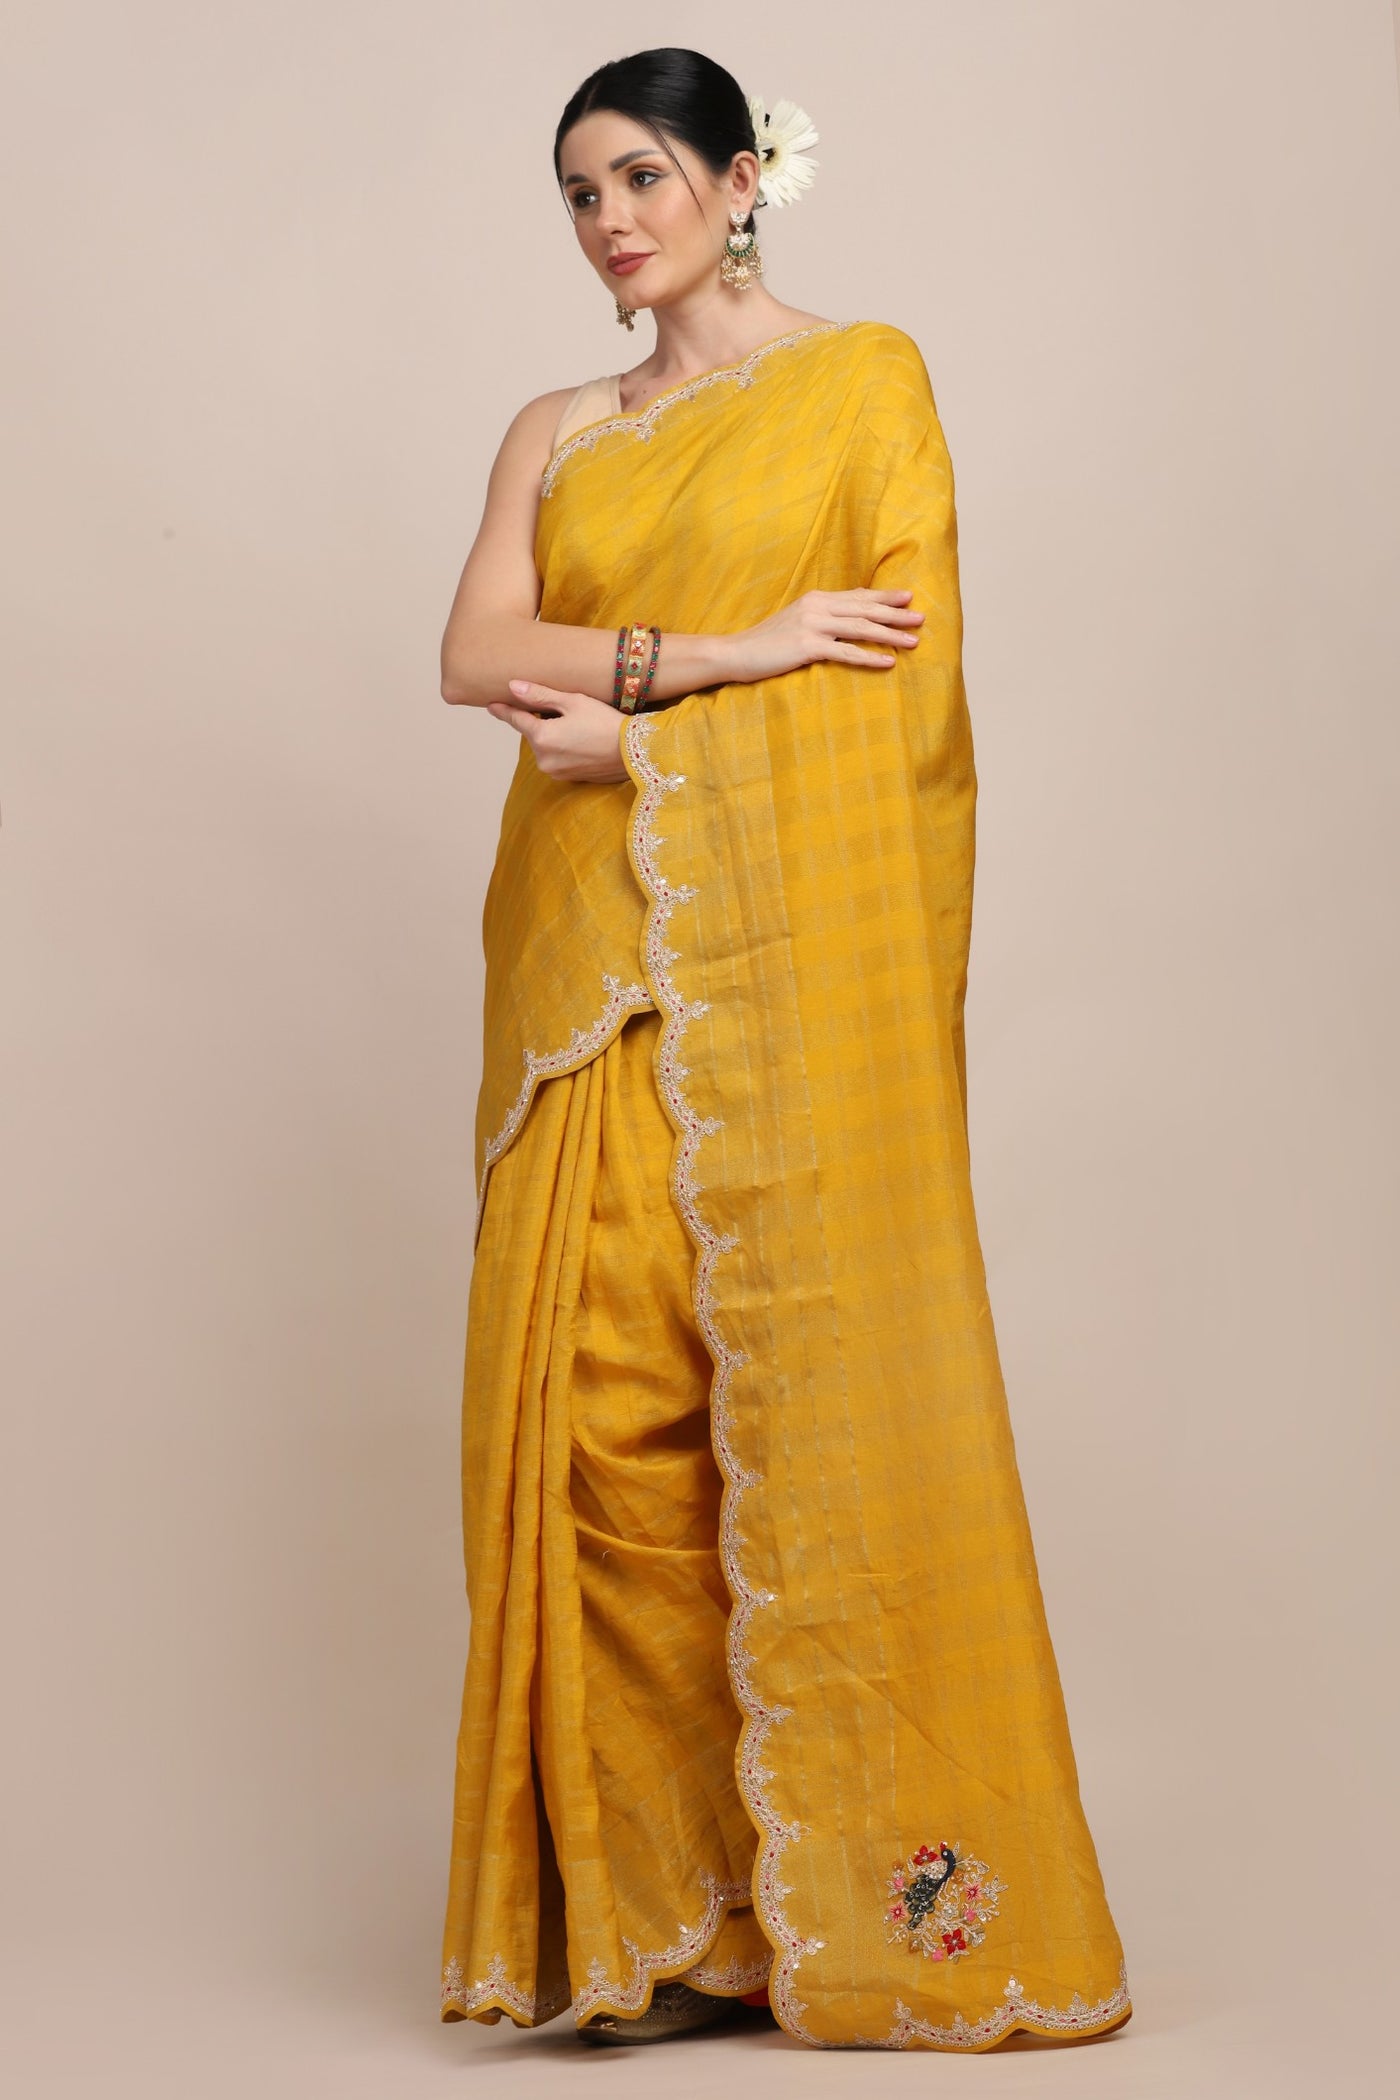 Elegant yellow color floral embroidered saree